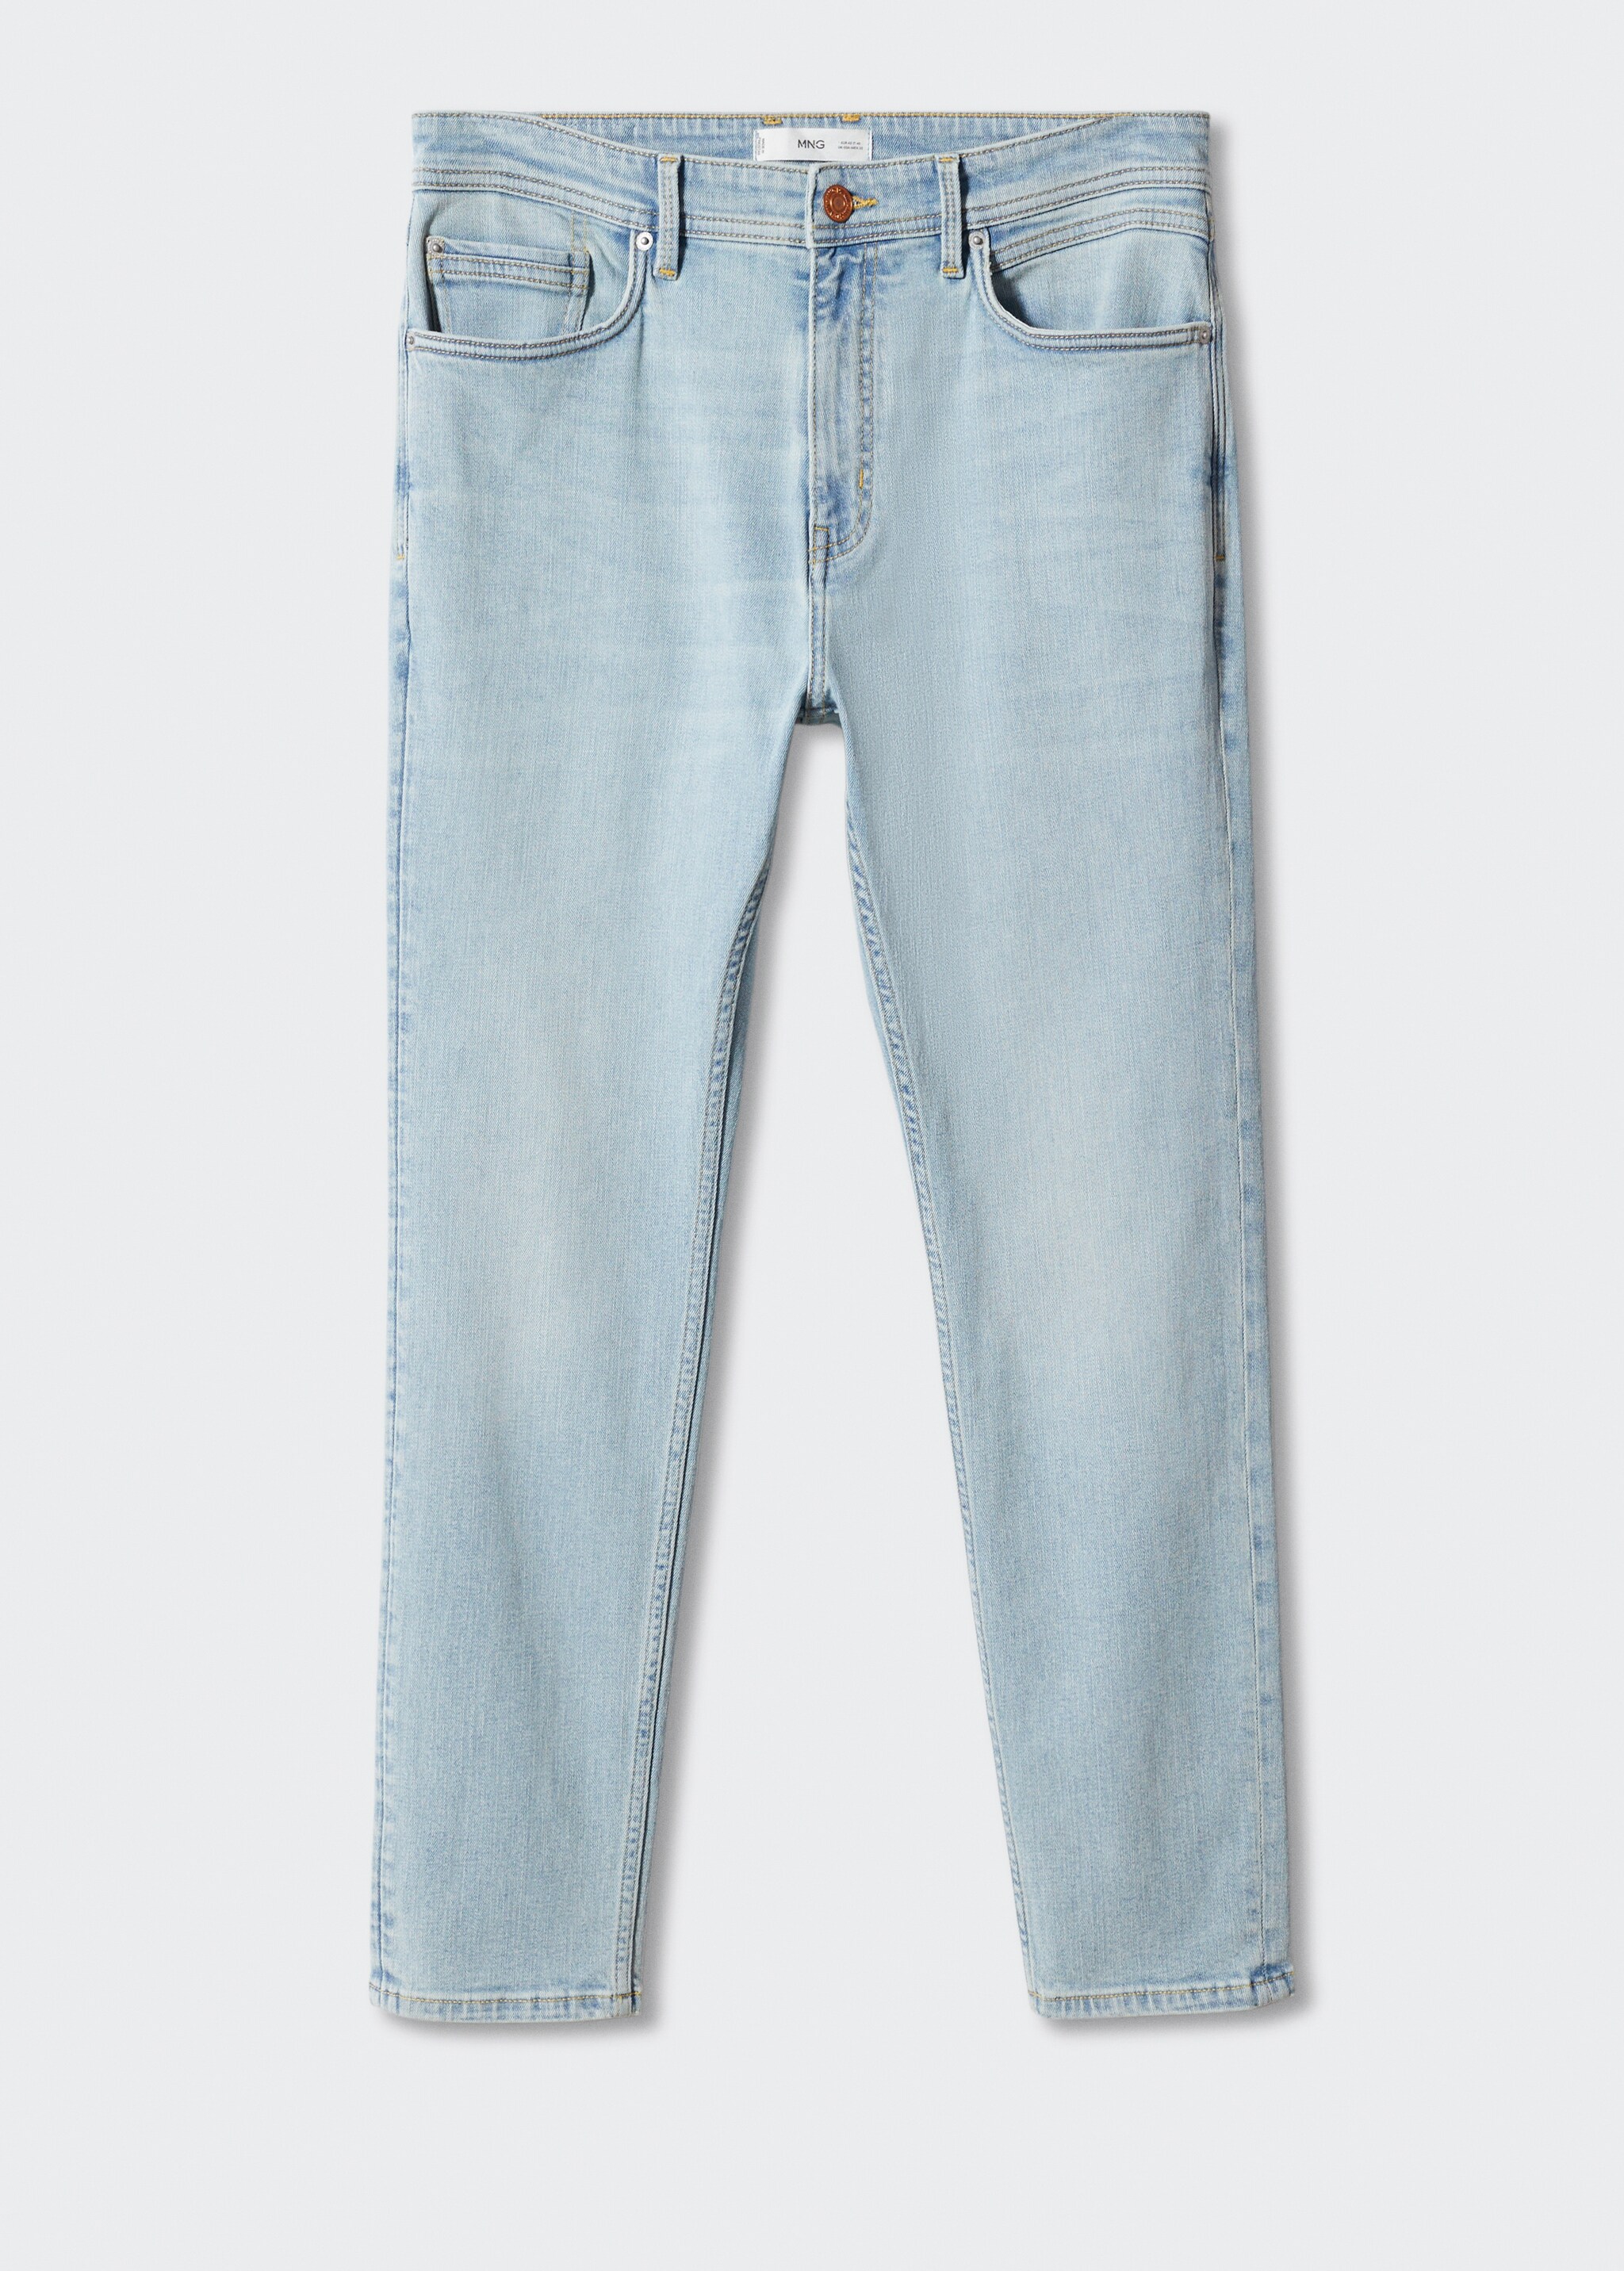 Jeans Tom tapered cropped - Artículo sin modelo